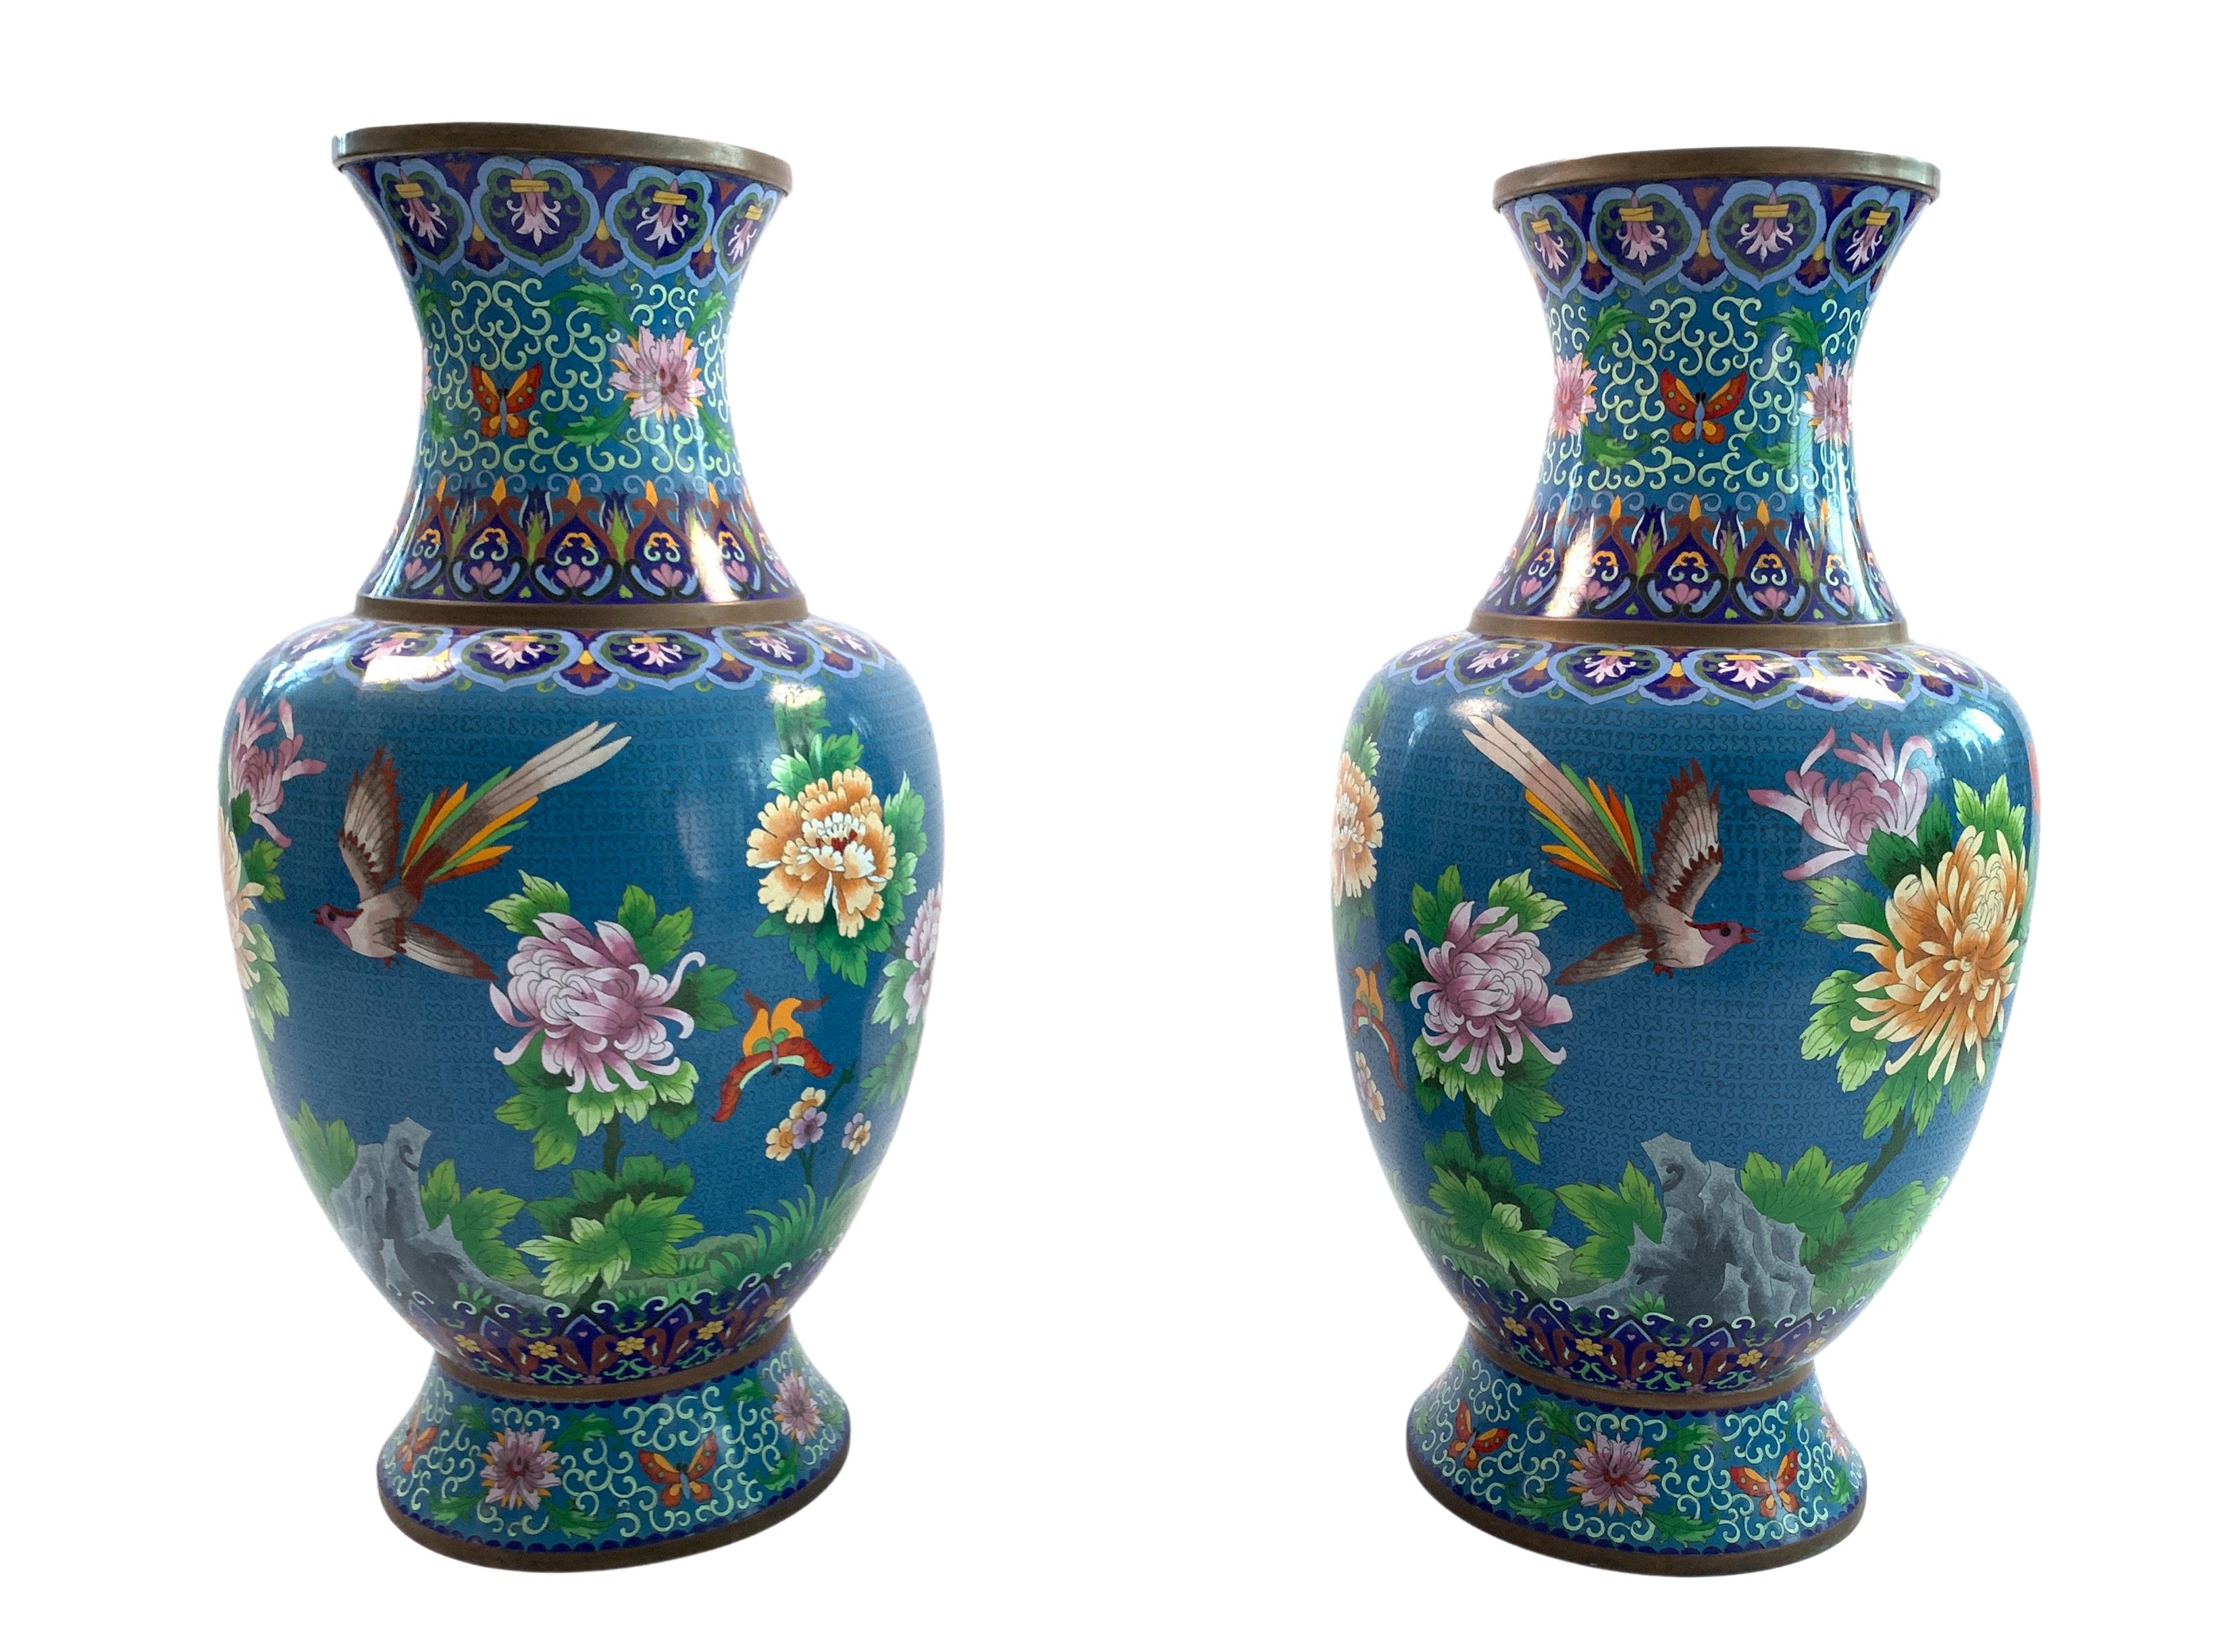 A lovely 20th century pair of brass Chinese Cloisonné vases sites on gilded wooden bases. Decorated with a striking blue enamel ground with red, yellow and pink chrysanthemum flowers and birds, collar and footed base are decorated with Cloisonné